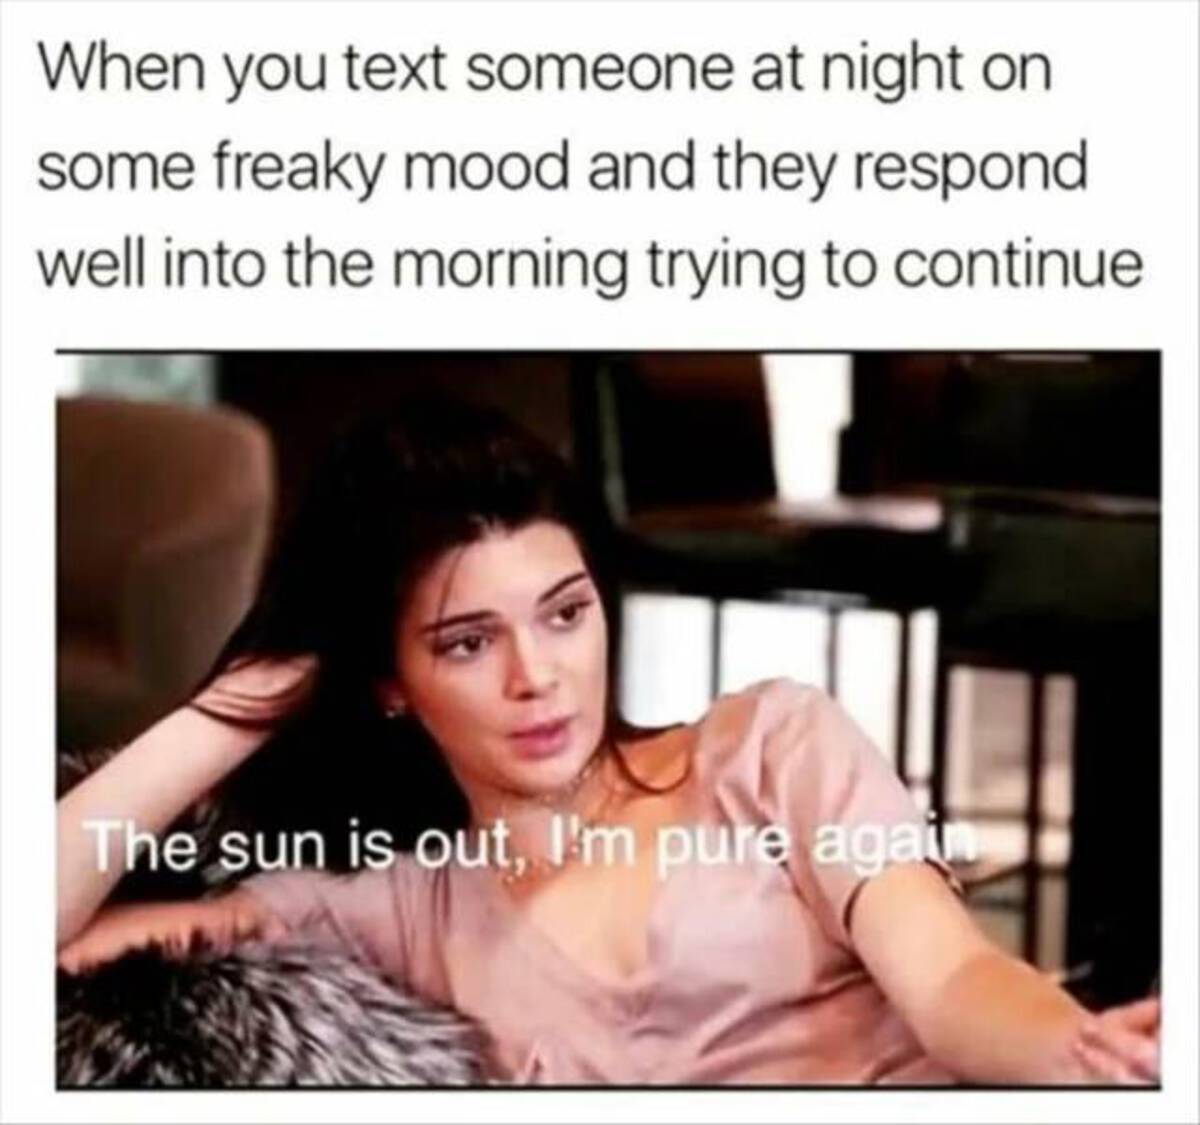 Internet meme - When you text someone at night on some freaky mood and they respond well into the morning trying to continue The sun is out, I'm pure again